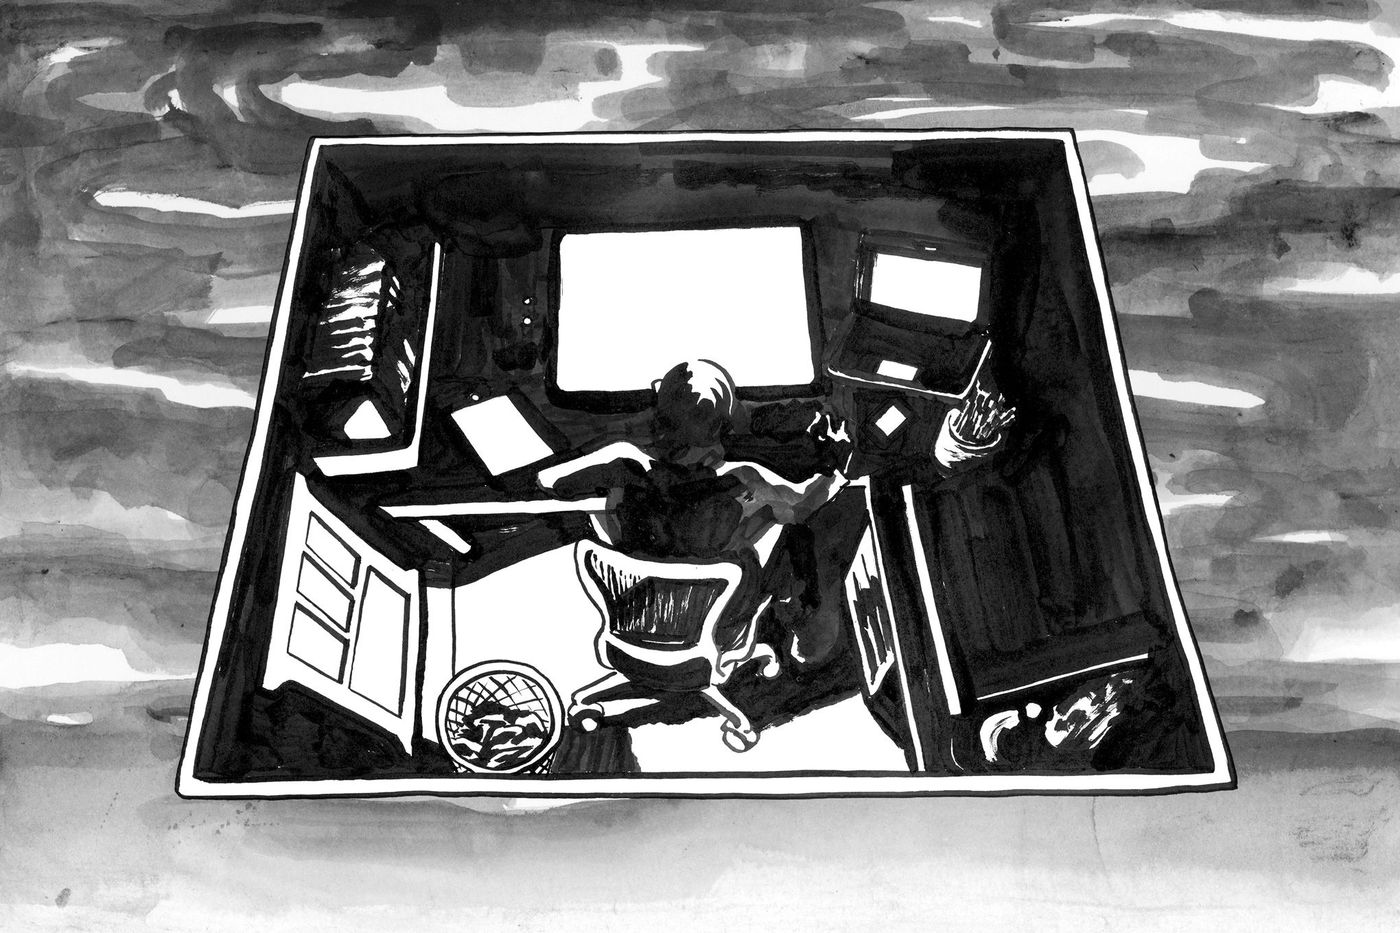 Illustration: An artist sits in a dark, cluttered office, working on an illustration. Behind the office is a stylized sky.